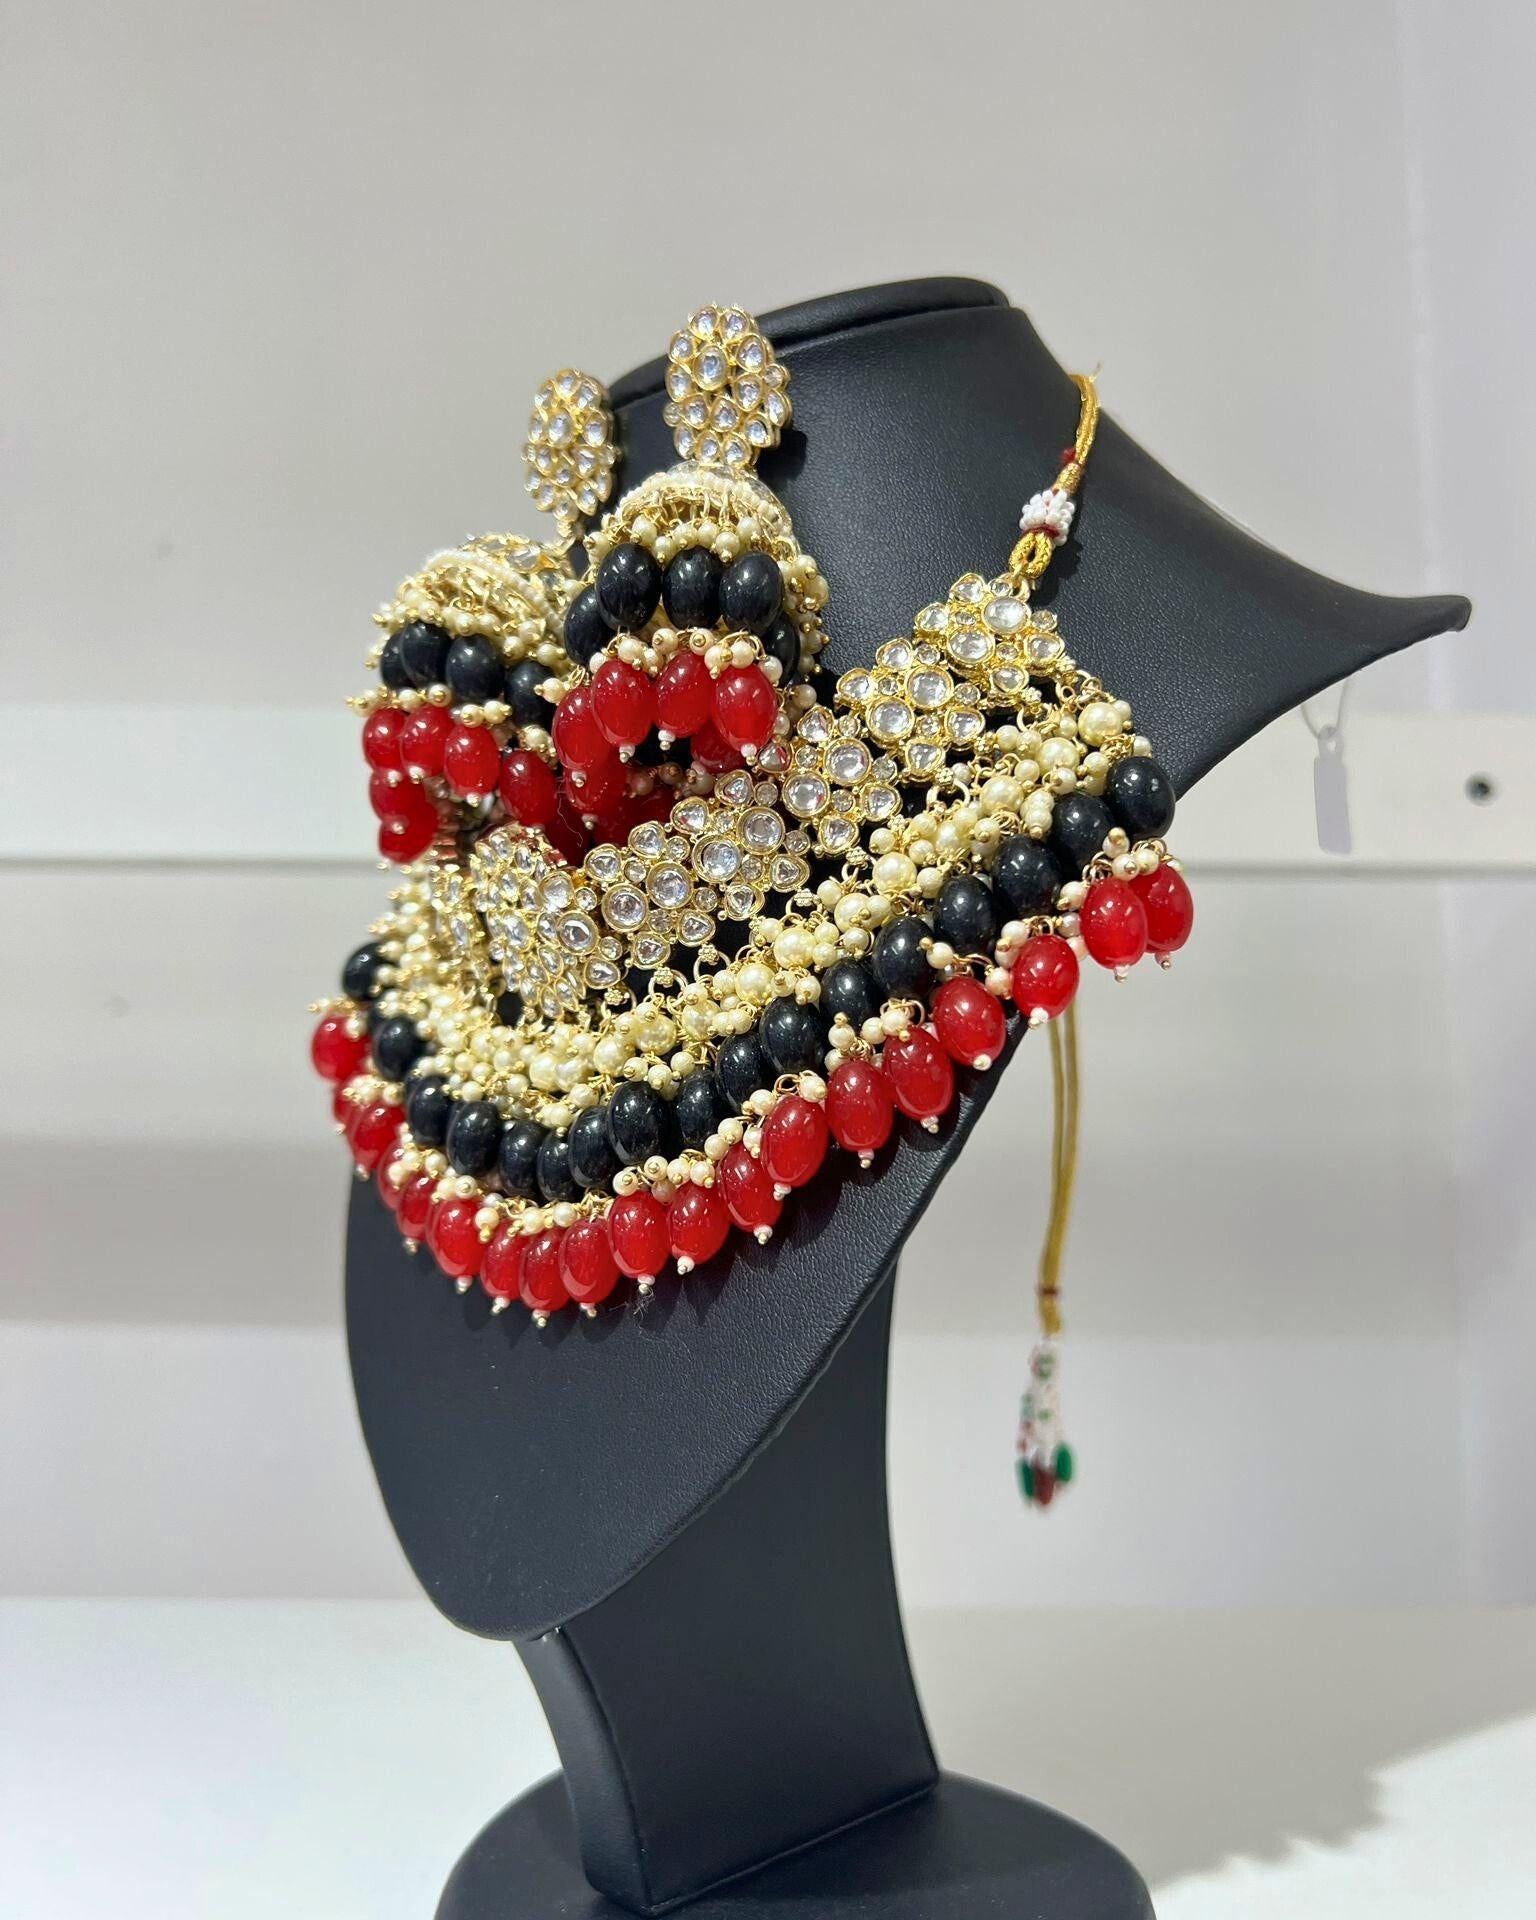 Choker Neckless Set In White, Black And Red - Boutique Nepal Au